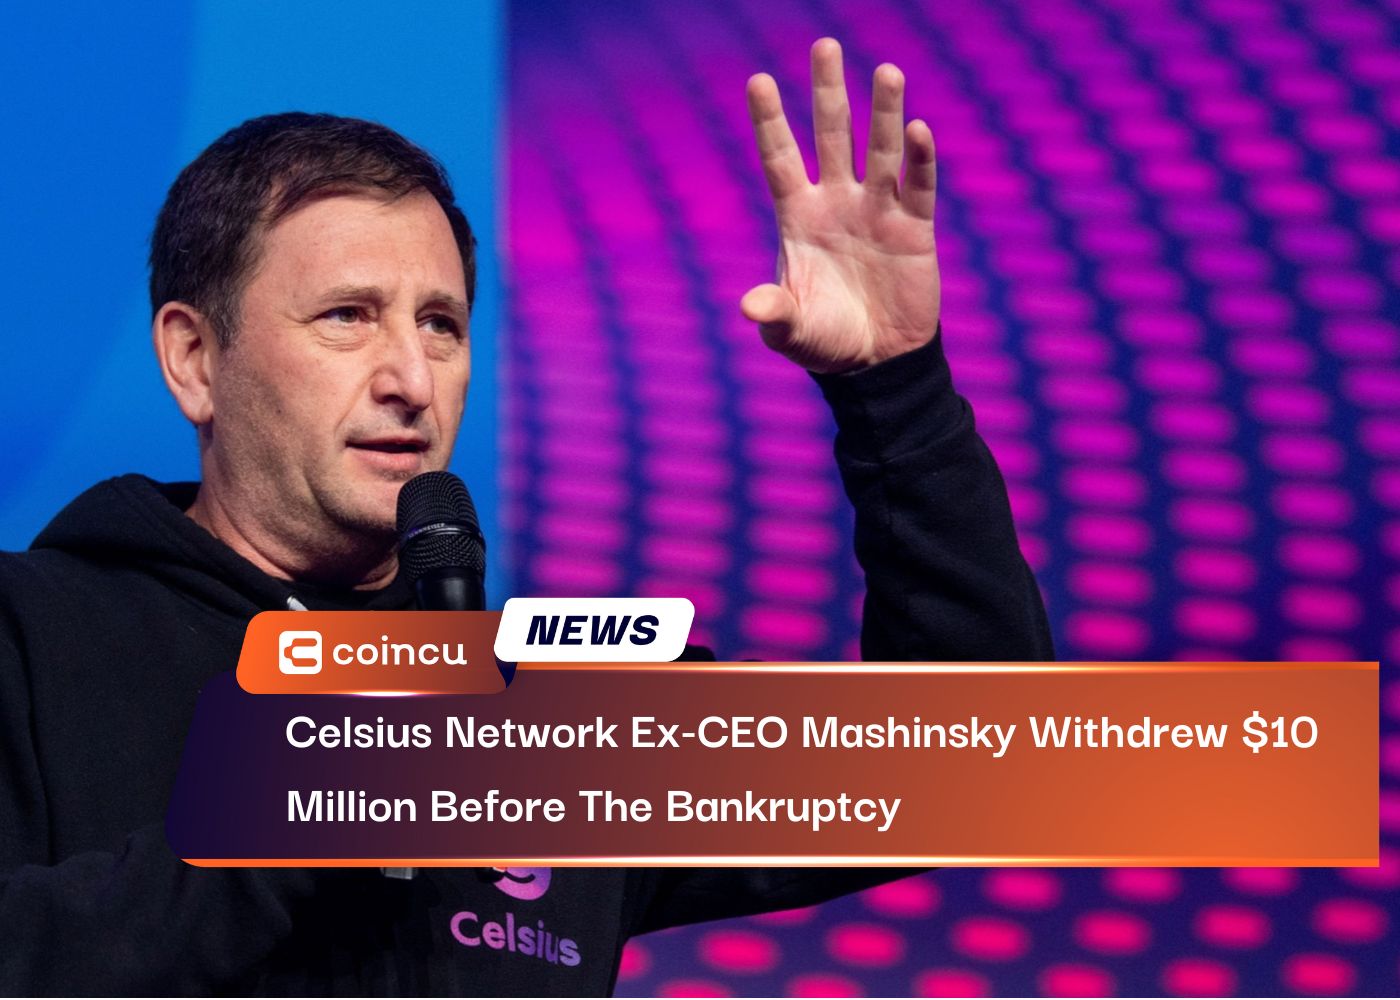 Celsius Network Ex-CEO Mashinsky Withdrew $10 Million Before The Bankruptcy